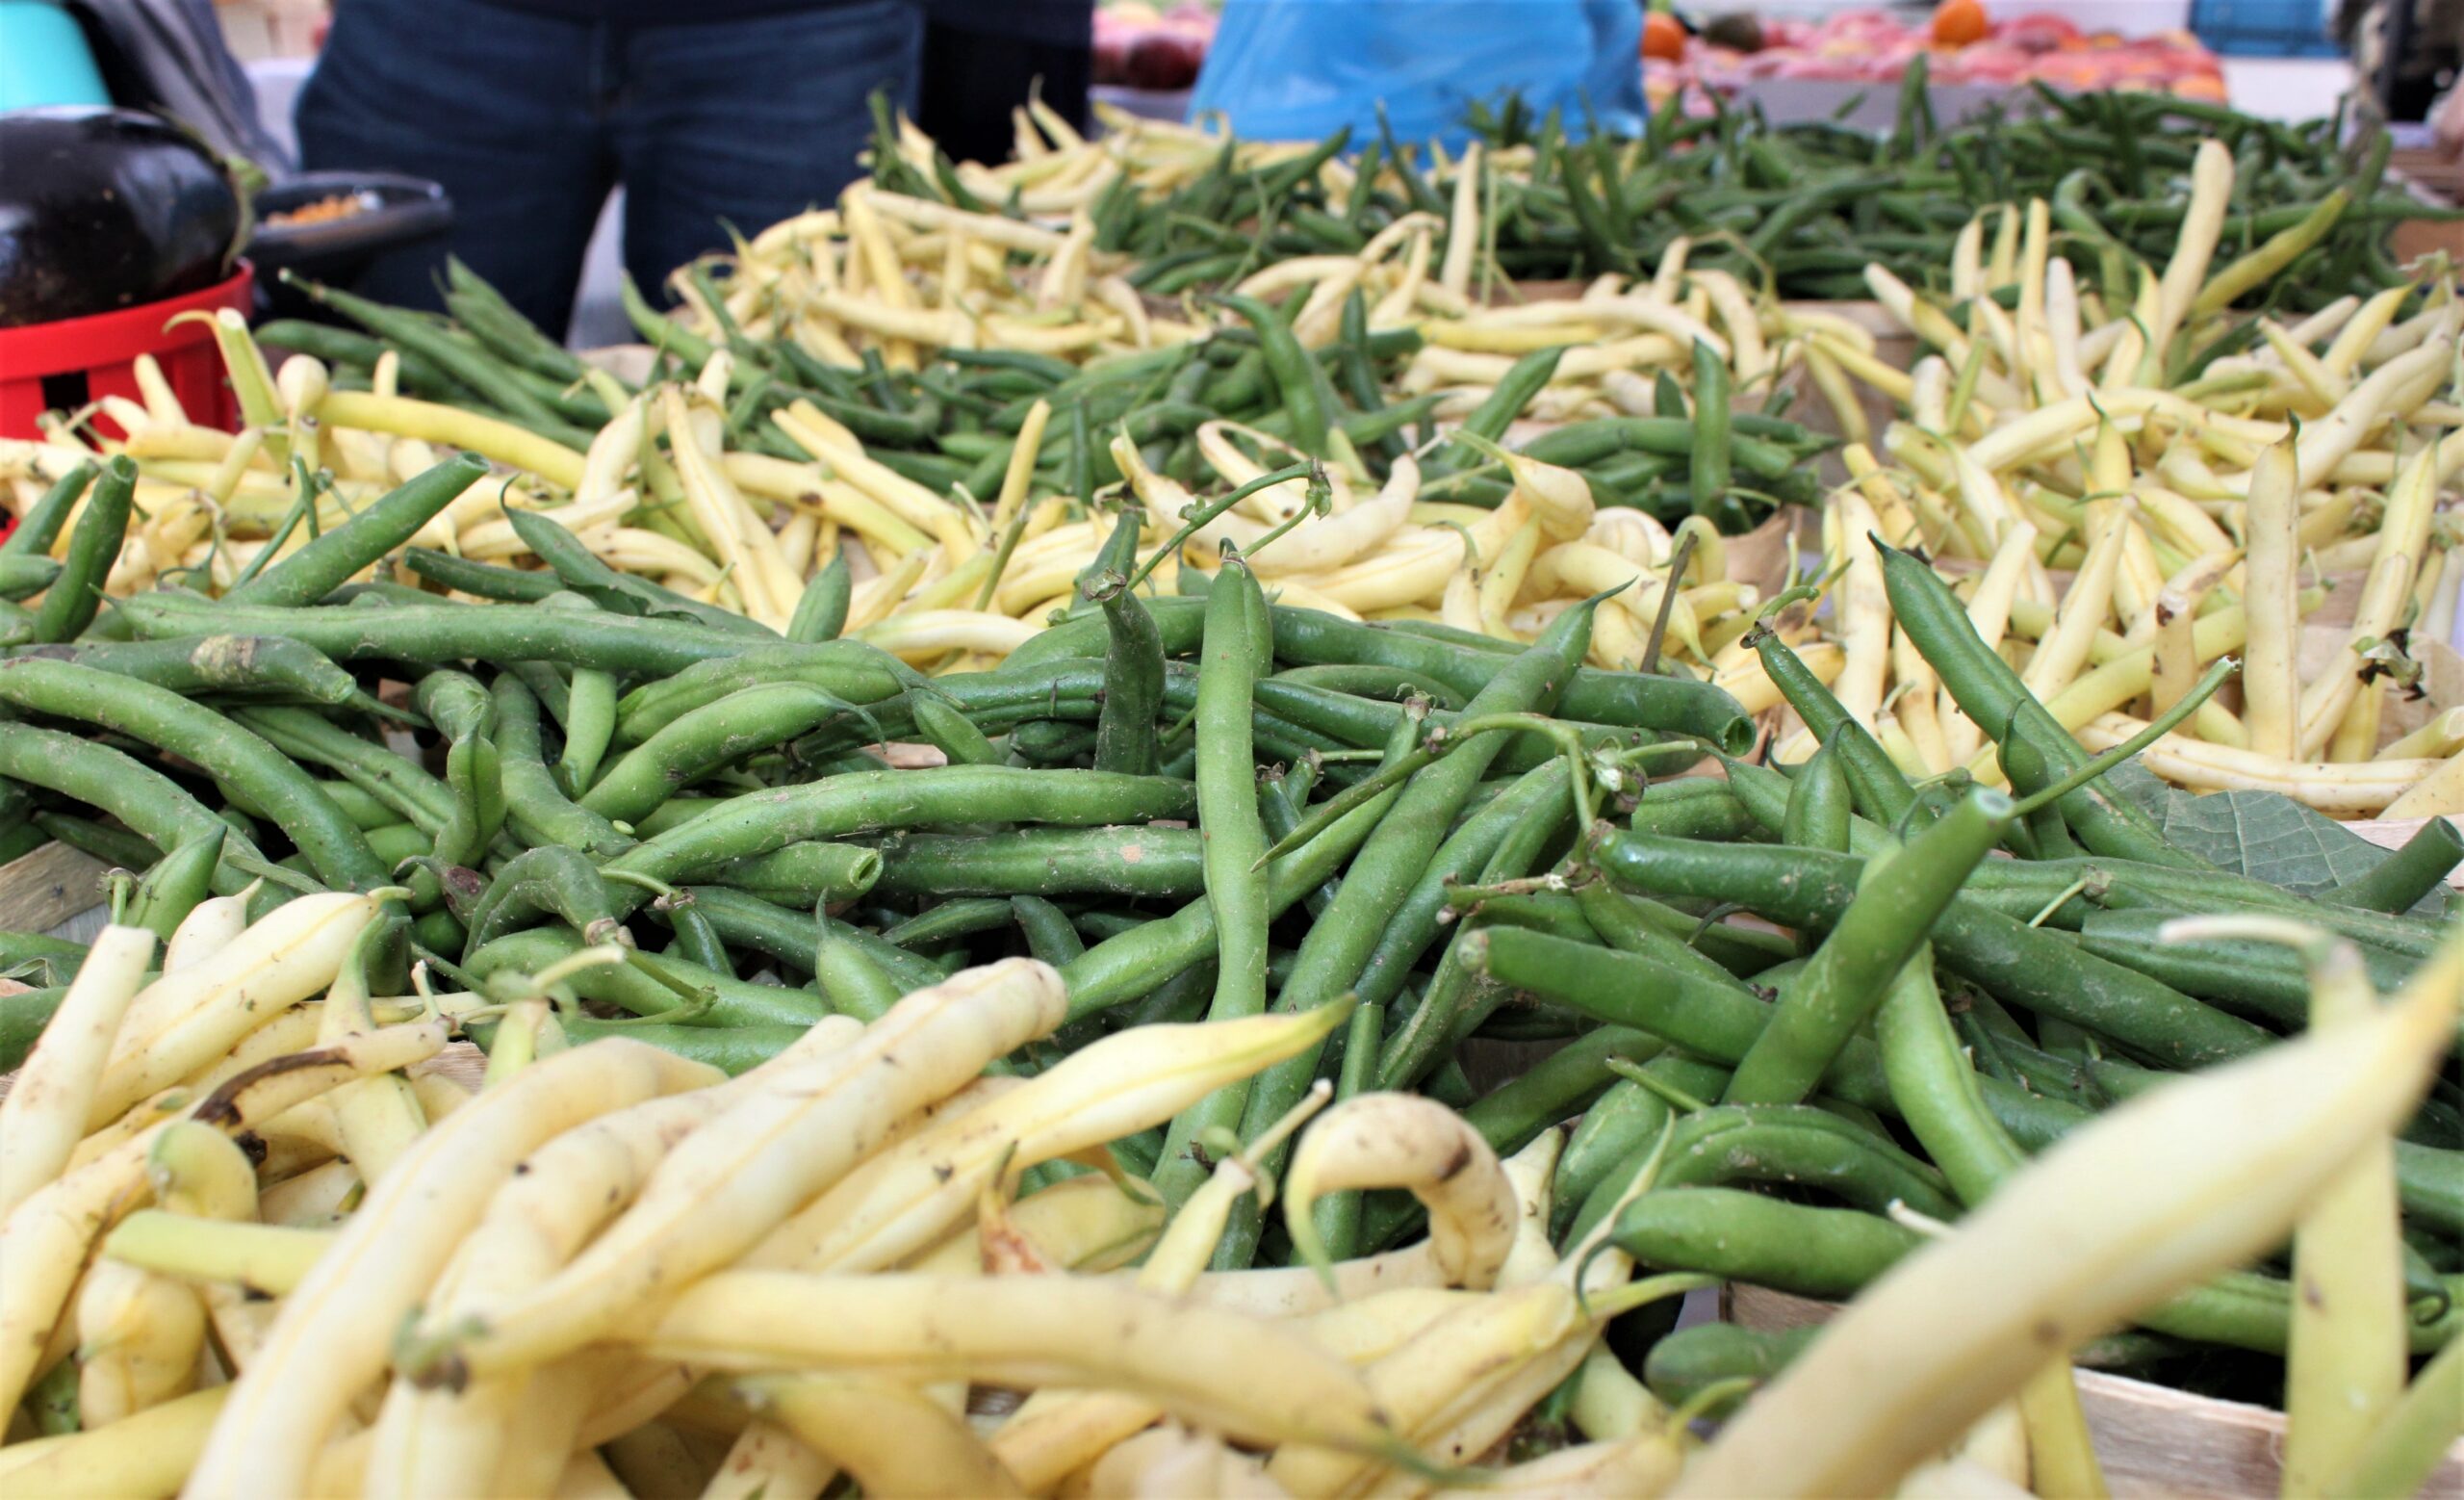 Green beans at the market